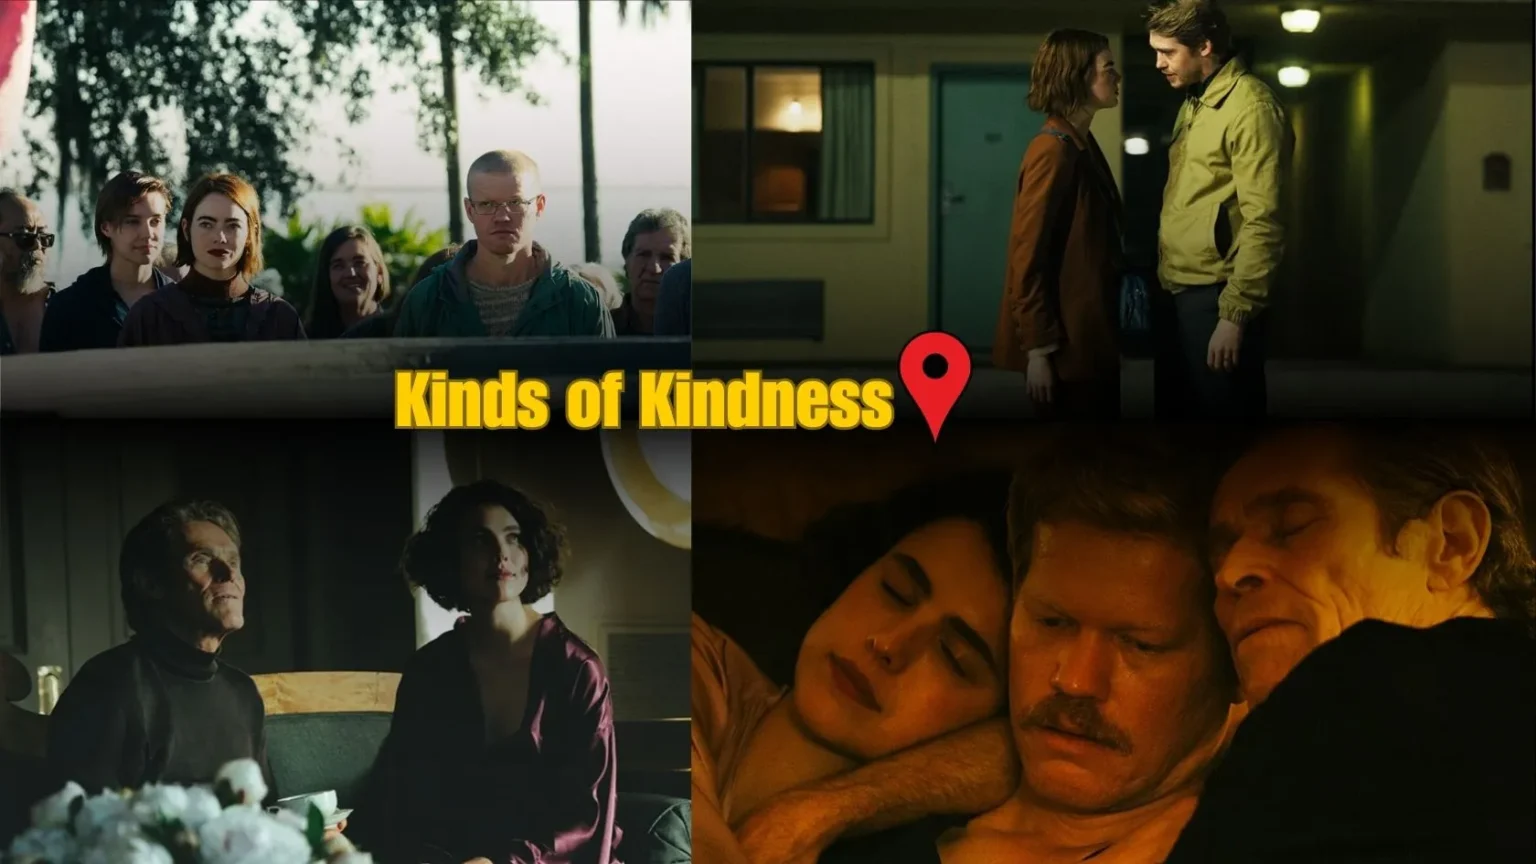 Kinds of Kindness Filming Locations